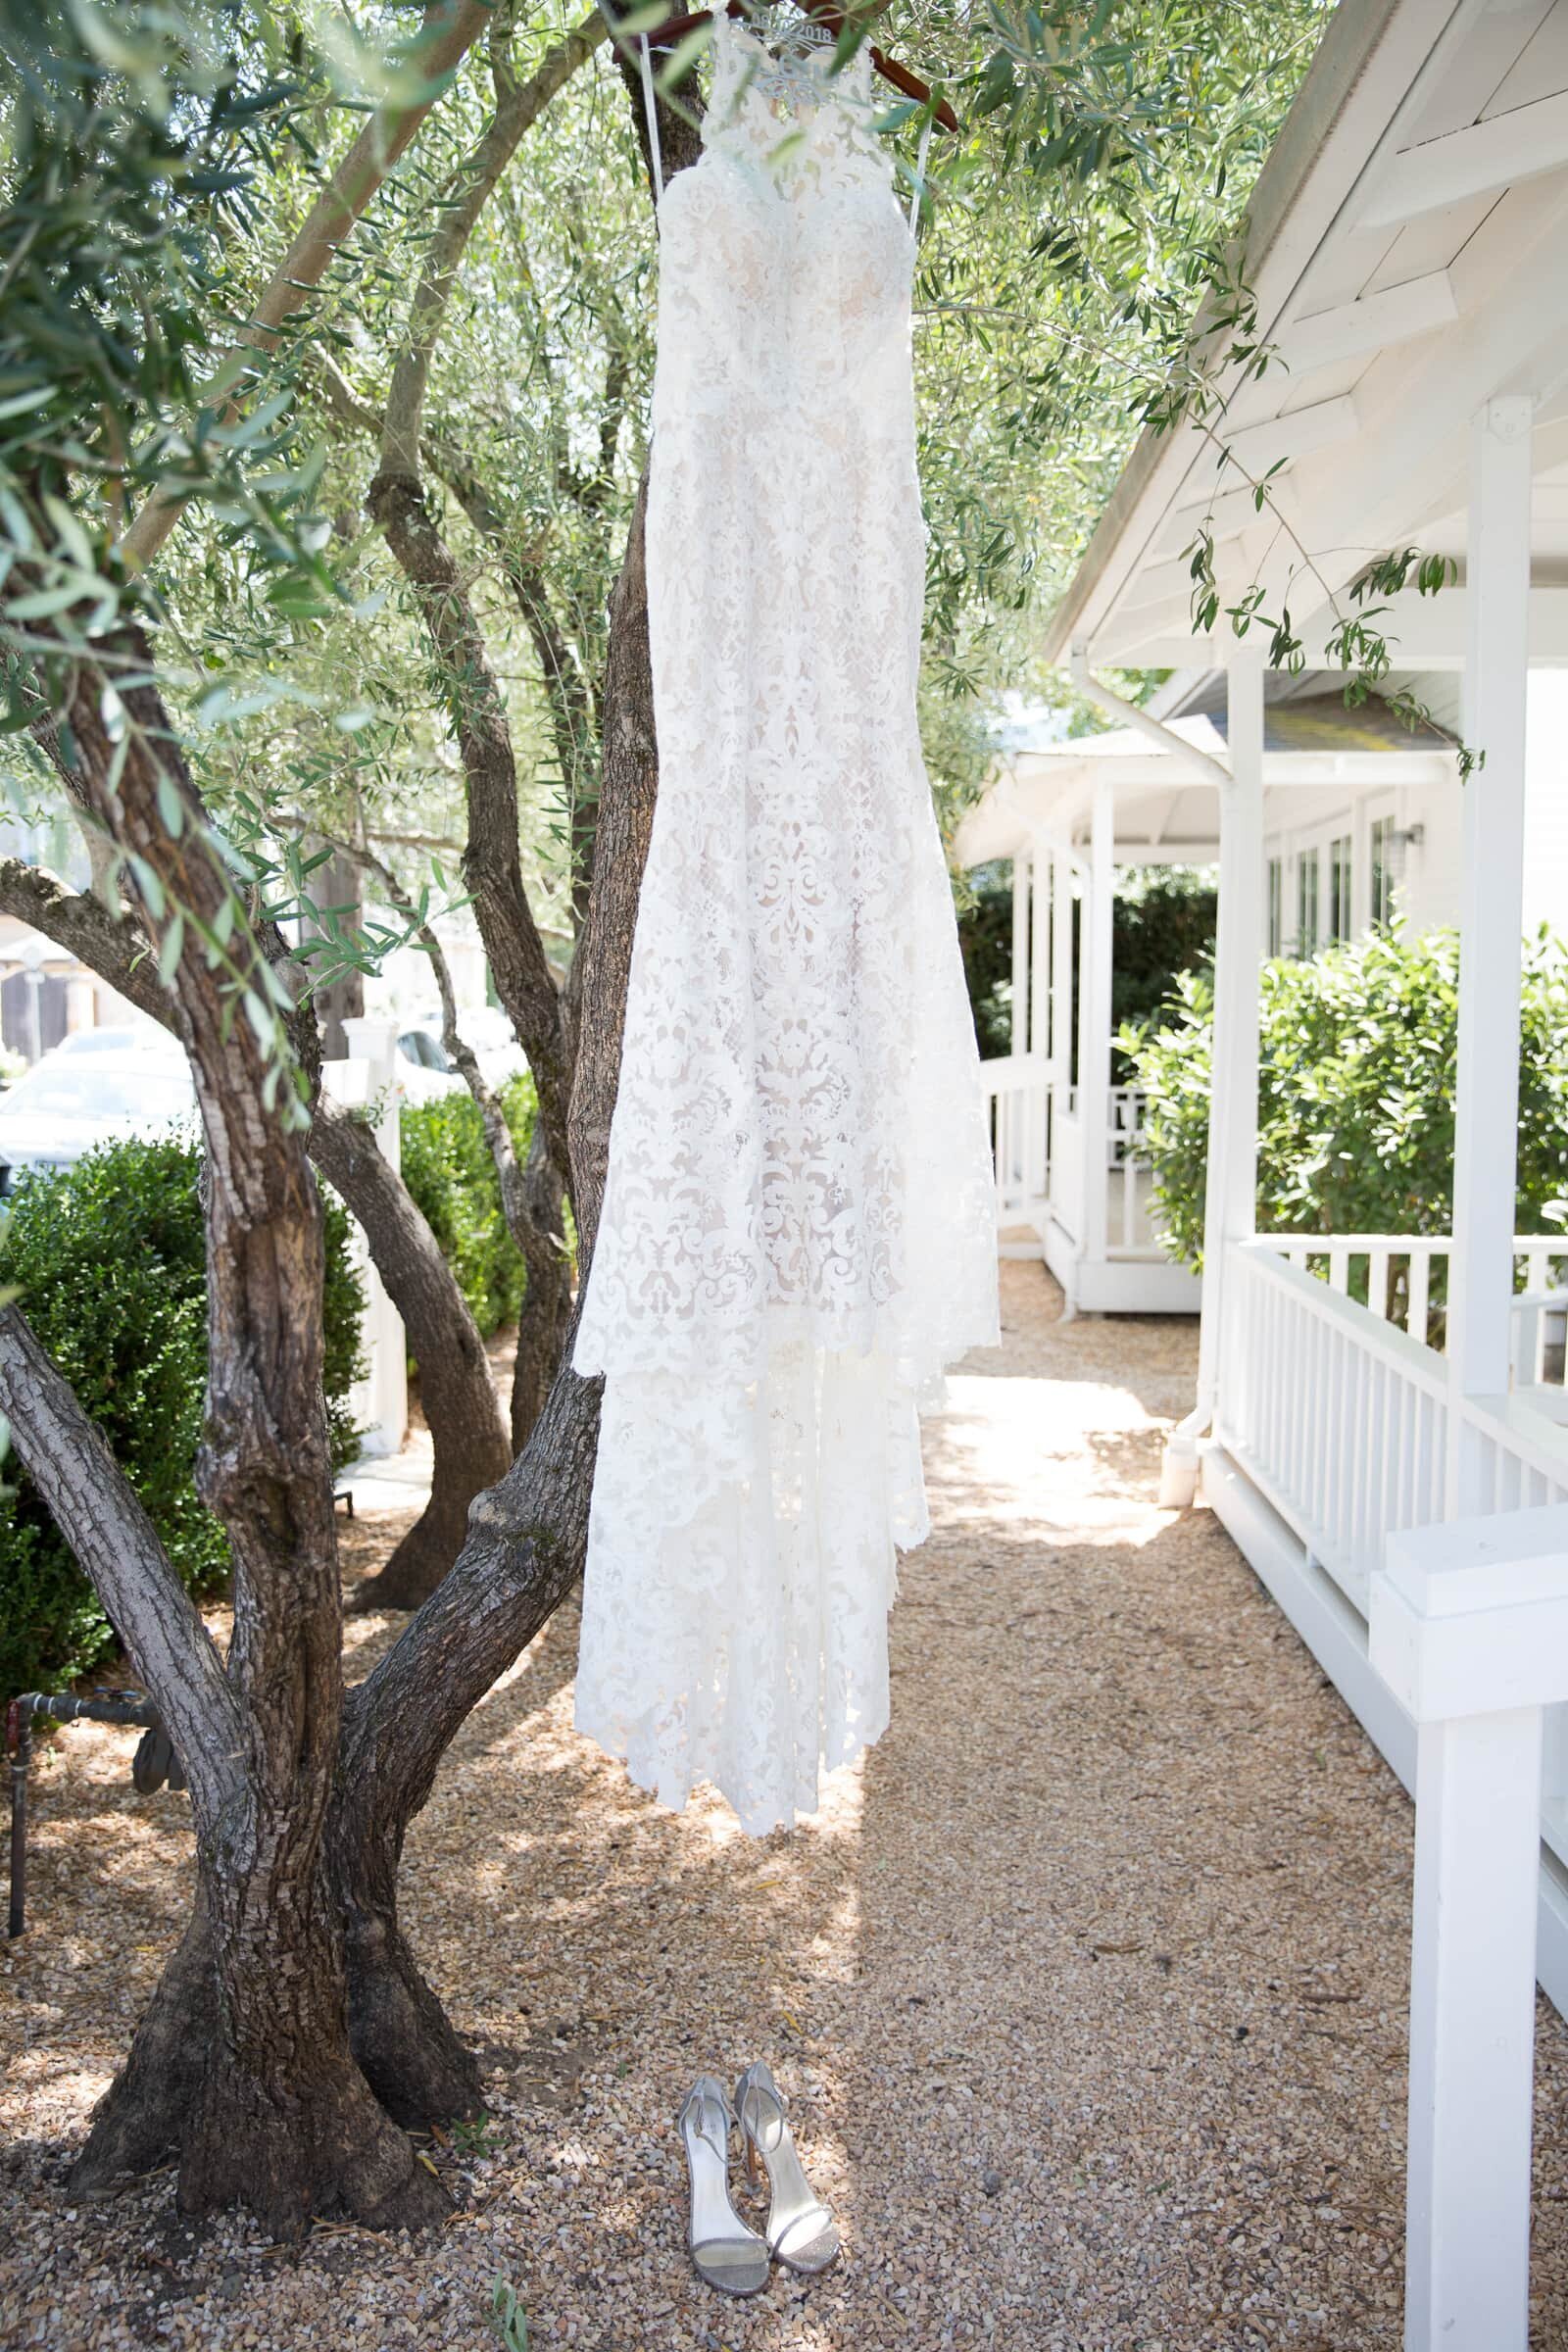 custom bridal gown hanging on an olive tree branch by Napa Valley wedding photographer.